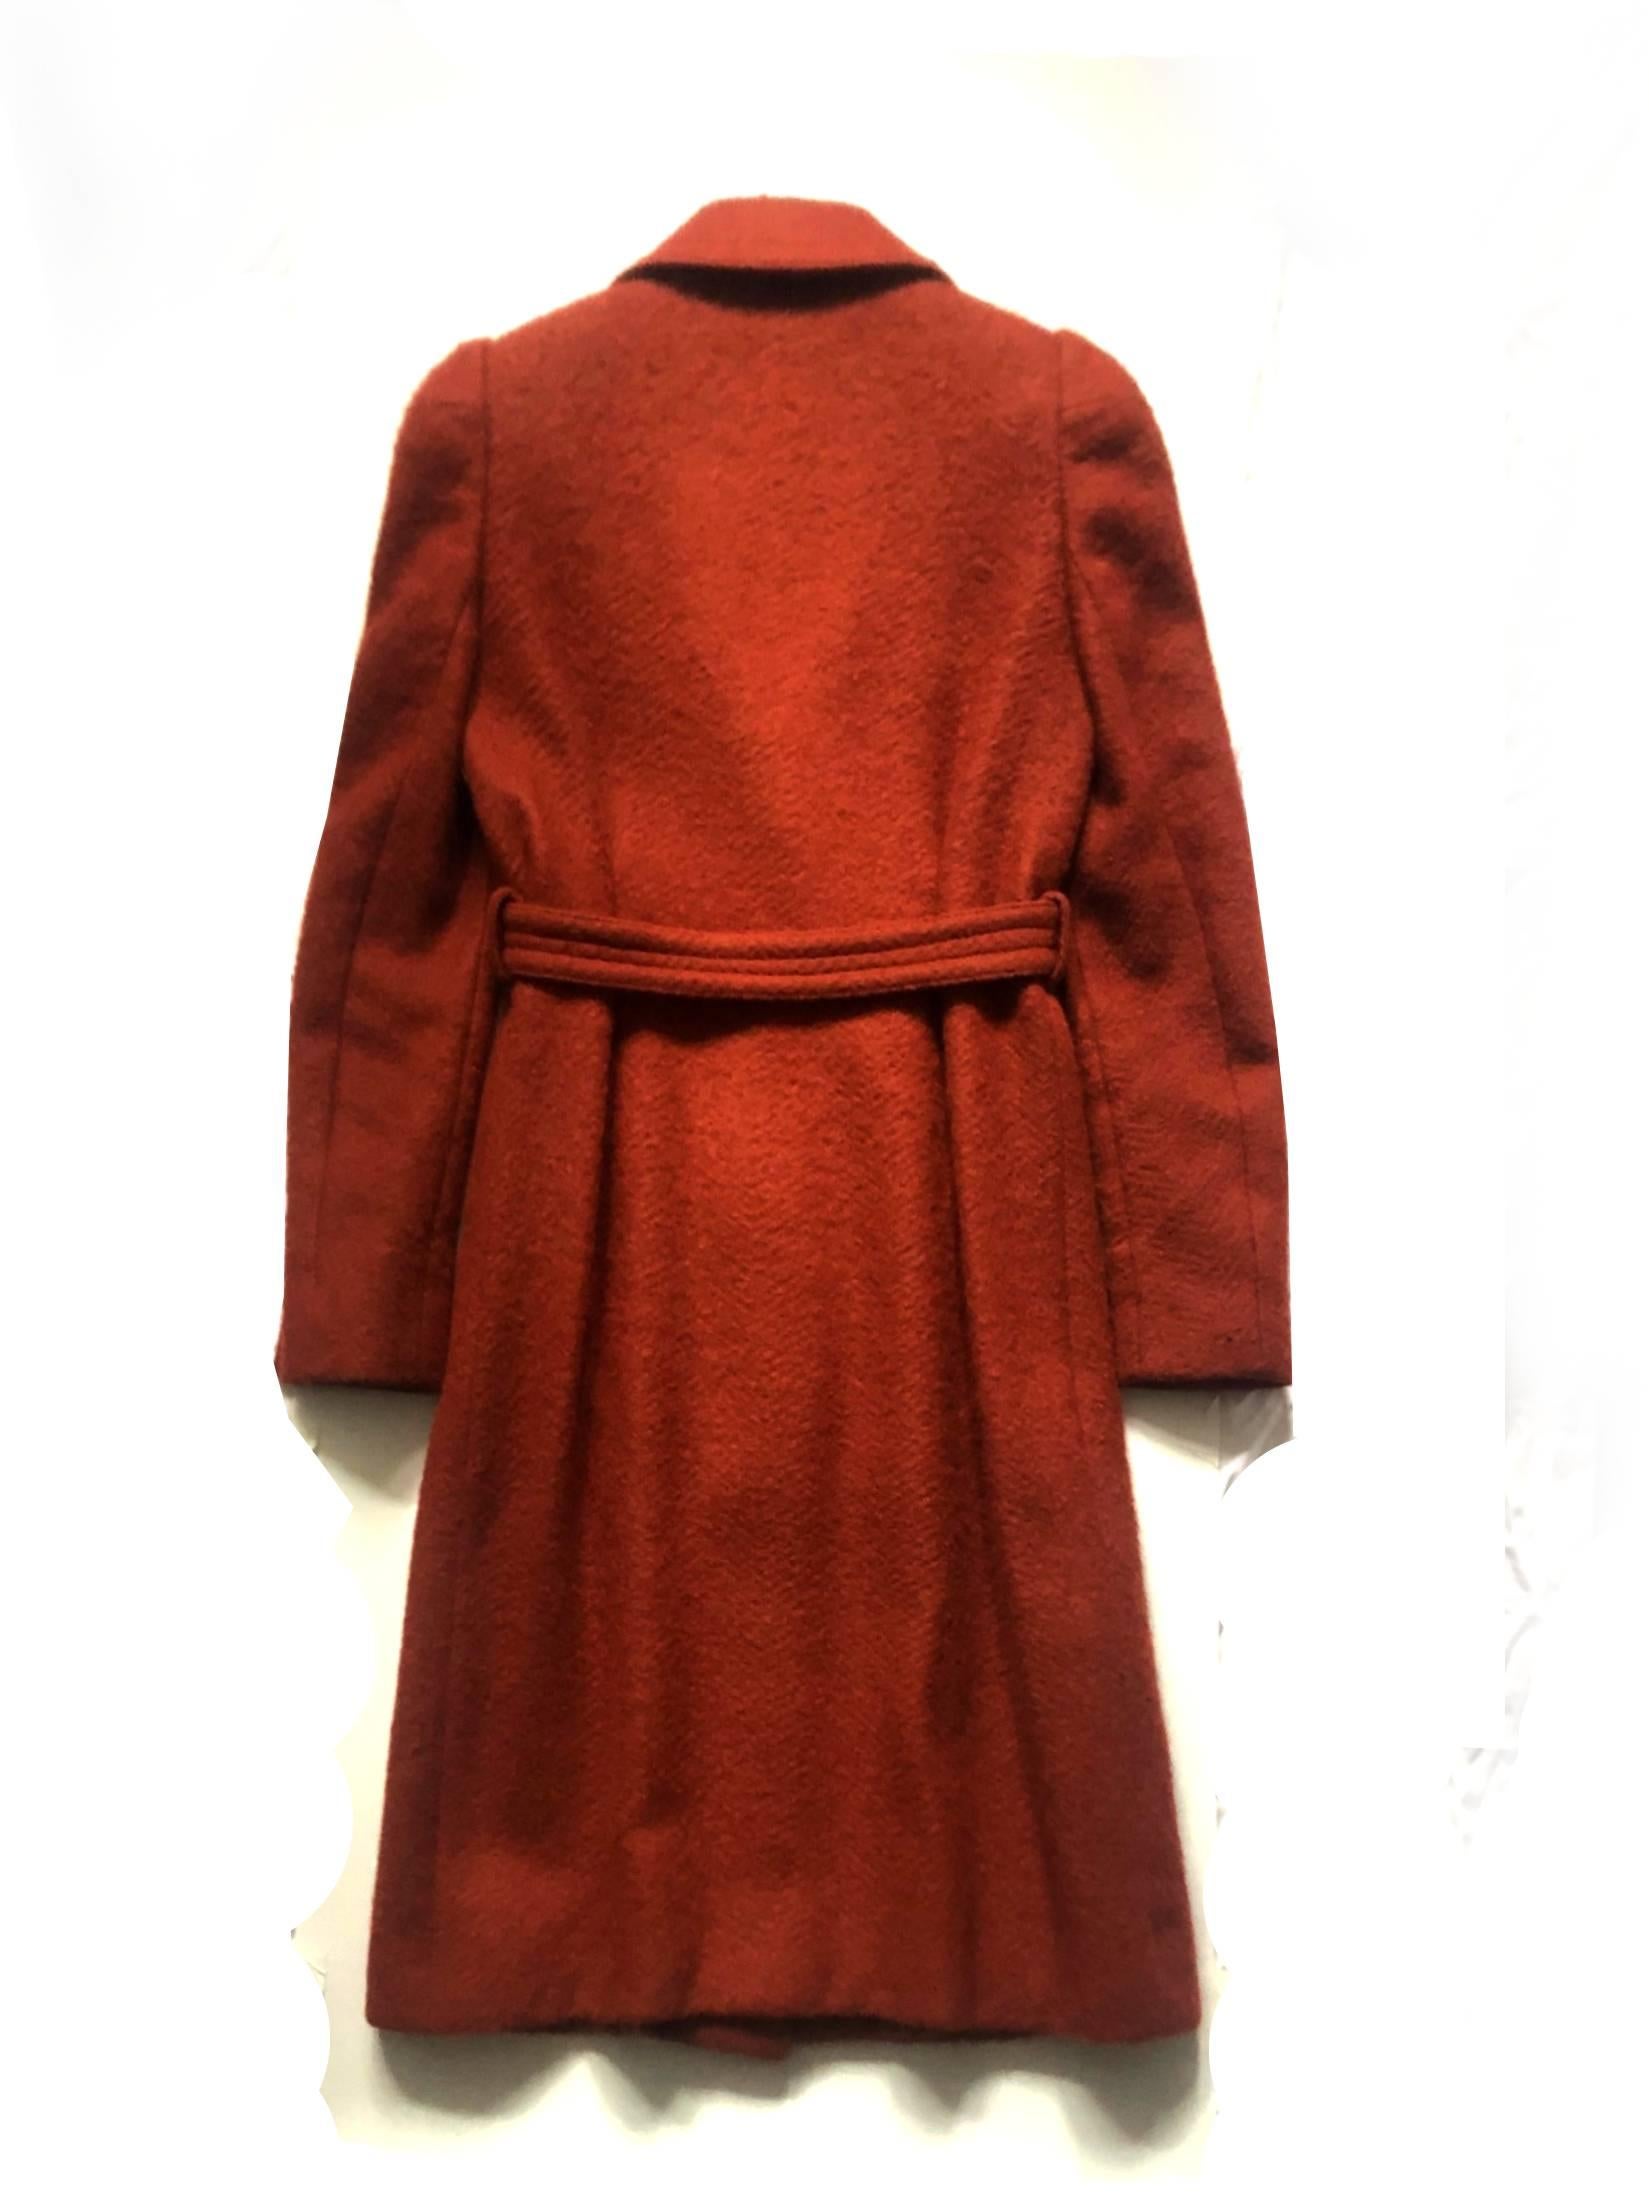 Gucci Alpaca wool coat, terracotta colour, slightly puffed shoulders, front button closure, front pockets, monogrammed lining and buttons, Alpaca wool 70% Lambs wool 30%, Made in Italy

Size: 38 IT - 8 UK - 2-4 USA

Measurements:
shoulder to